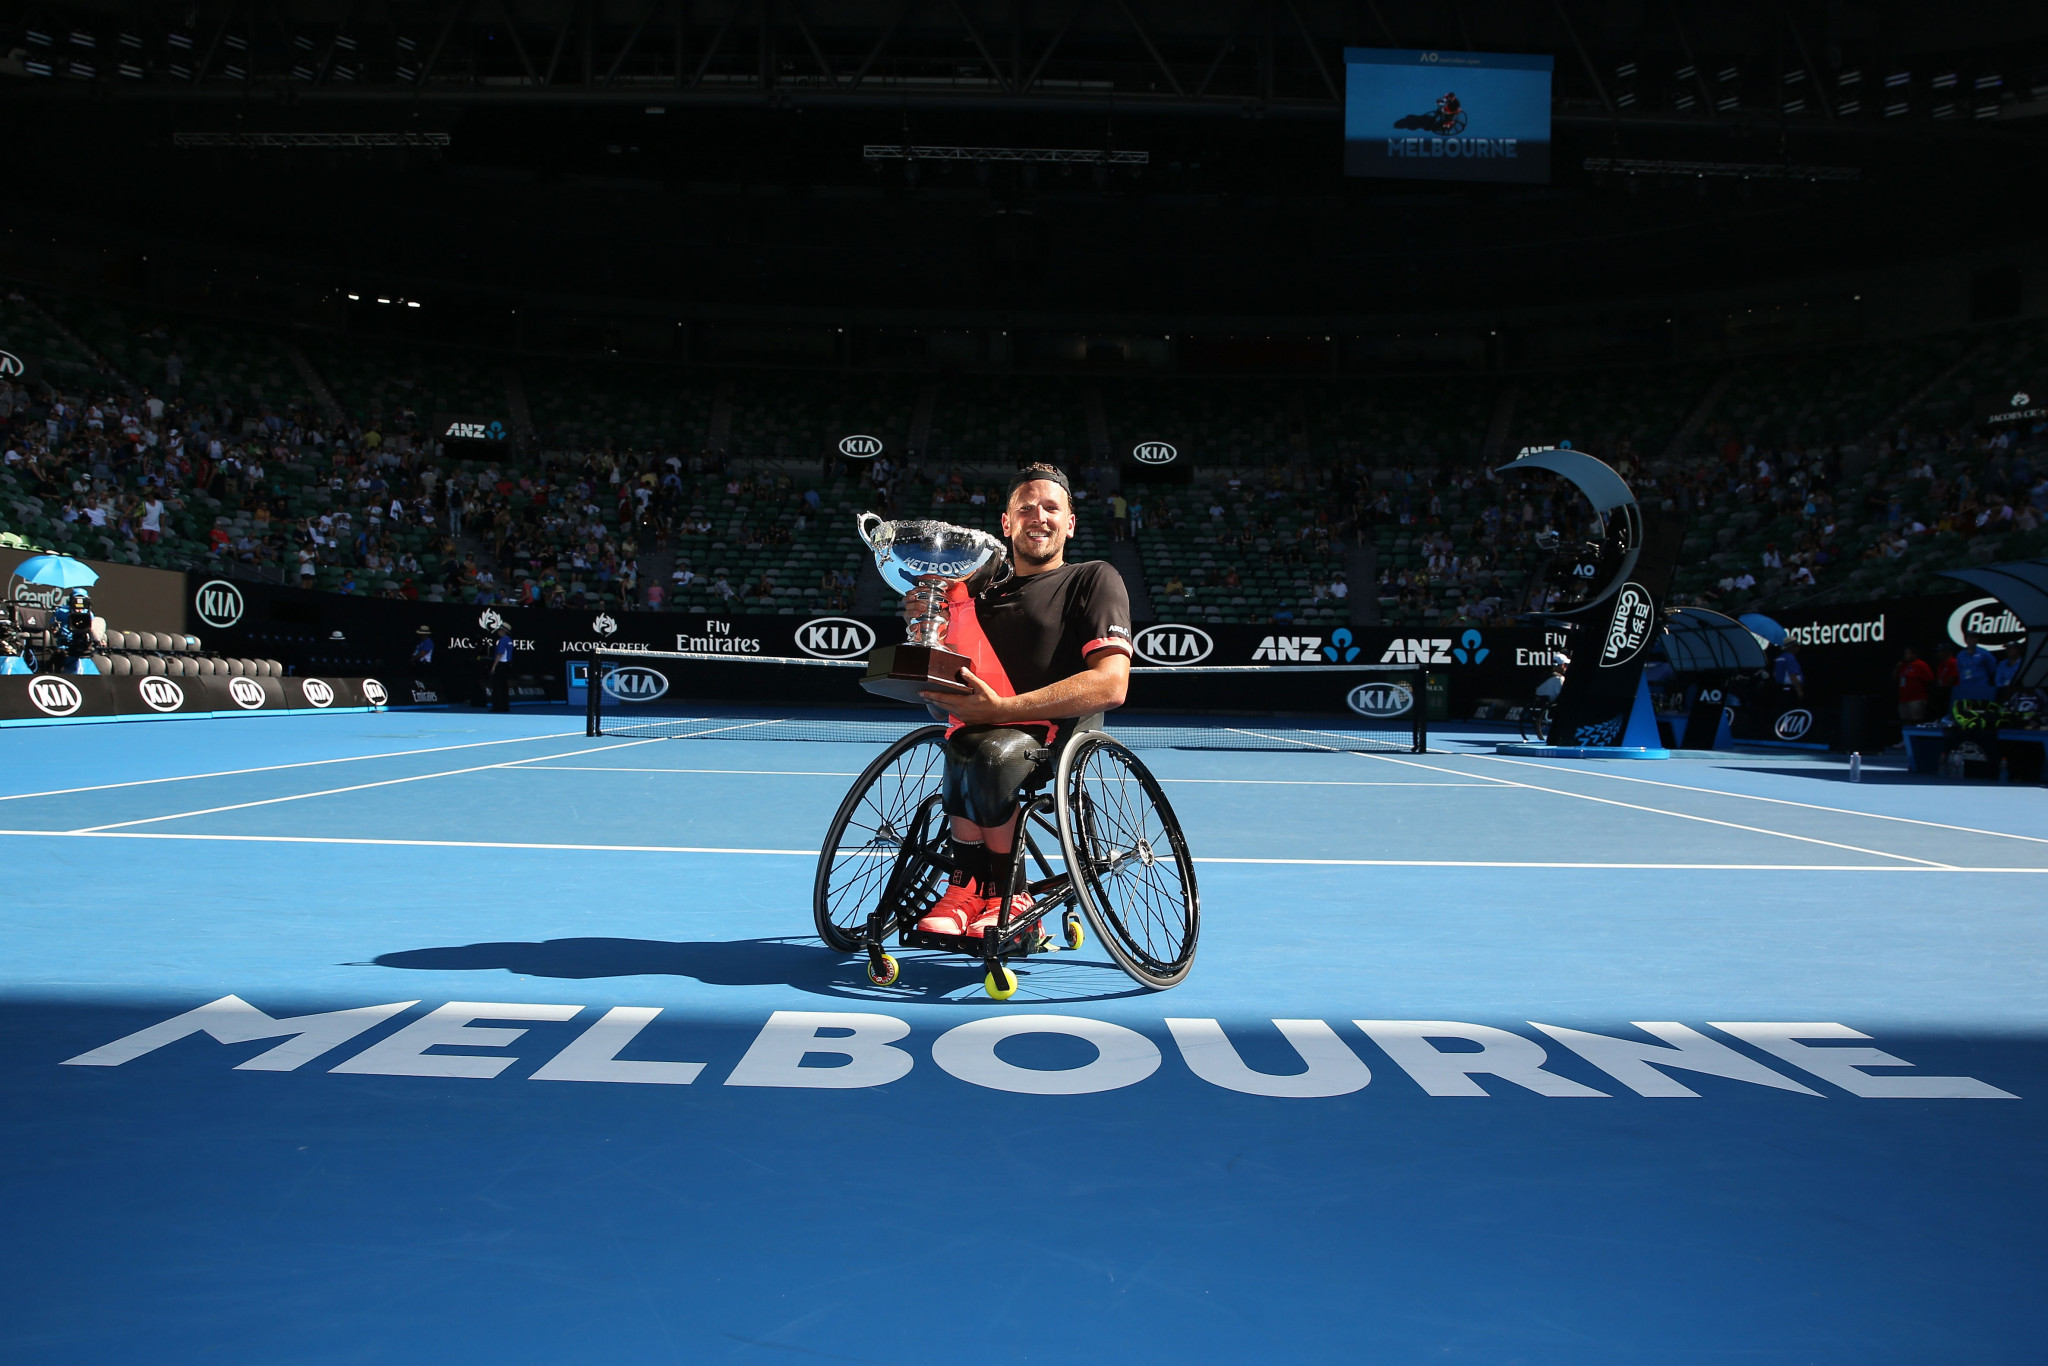 Home favourite Dylan Alcott secured his fourth consecutive wheelchair quad singles Australian Open title ©Getty Images